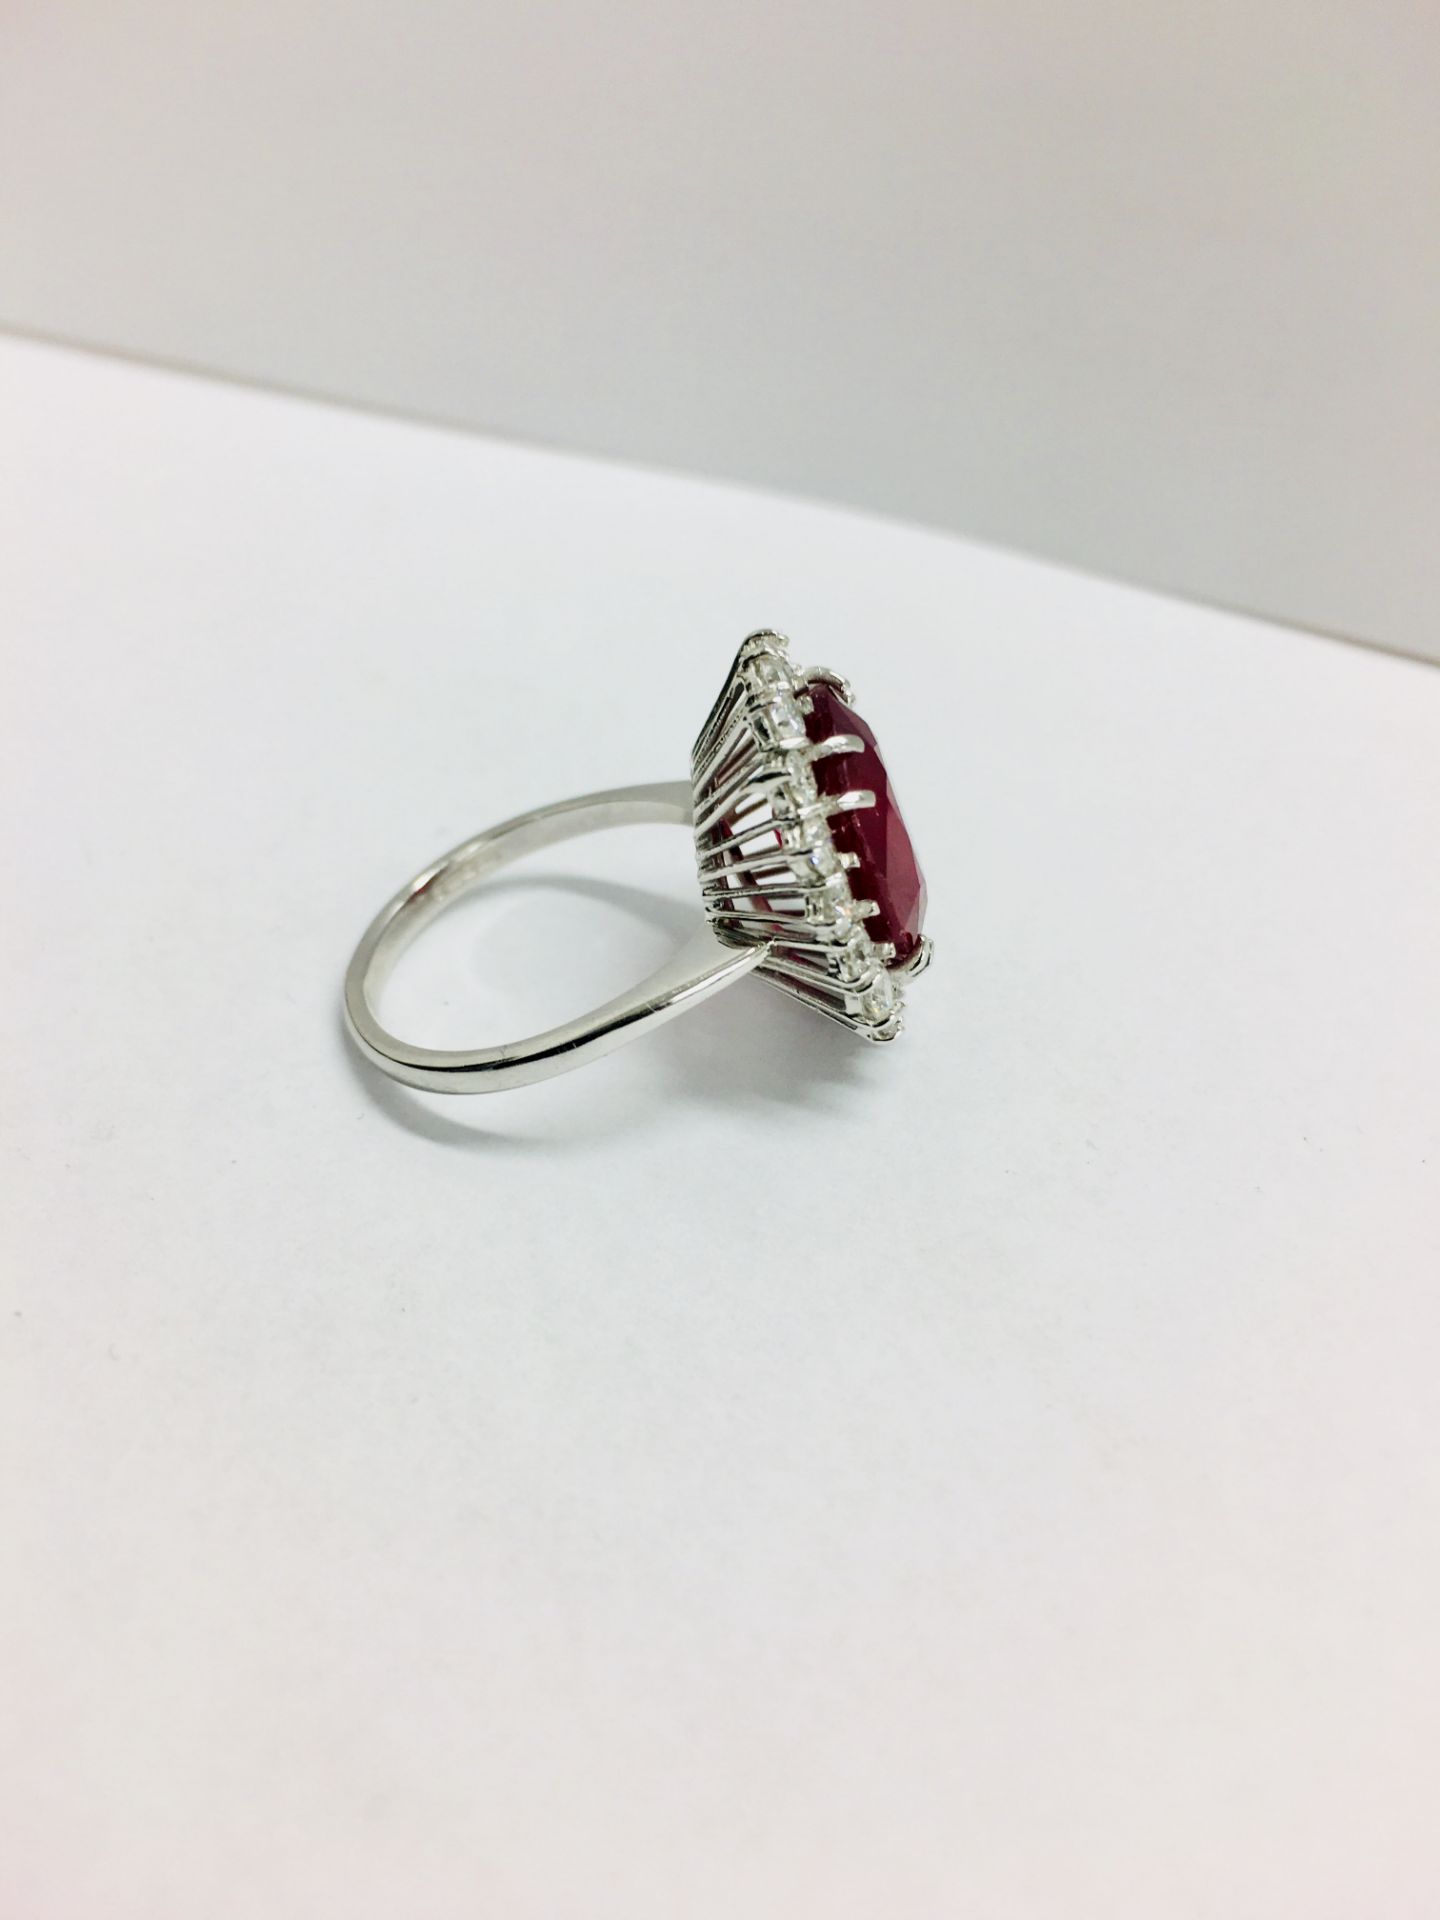 10Ct Ruby And Diamond Cluster Ring. - Image 3 of 6